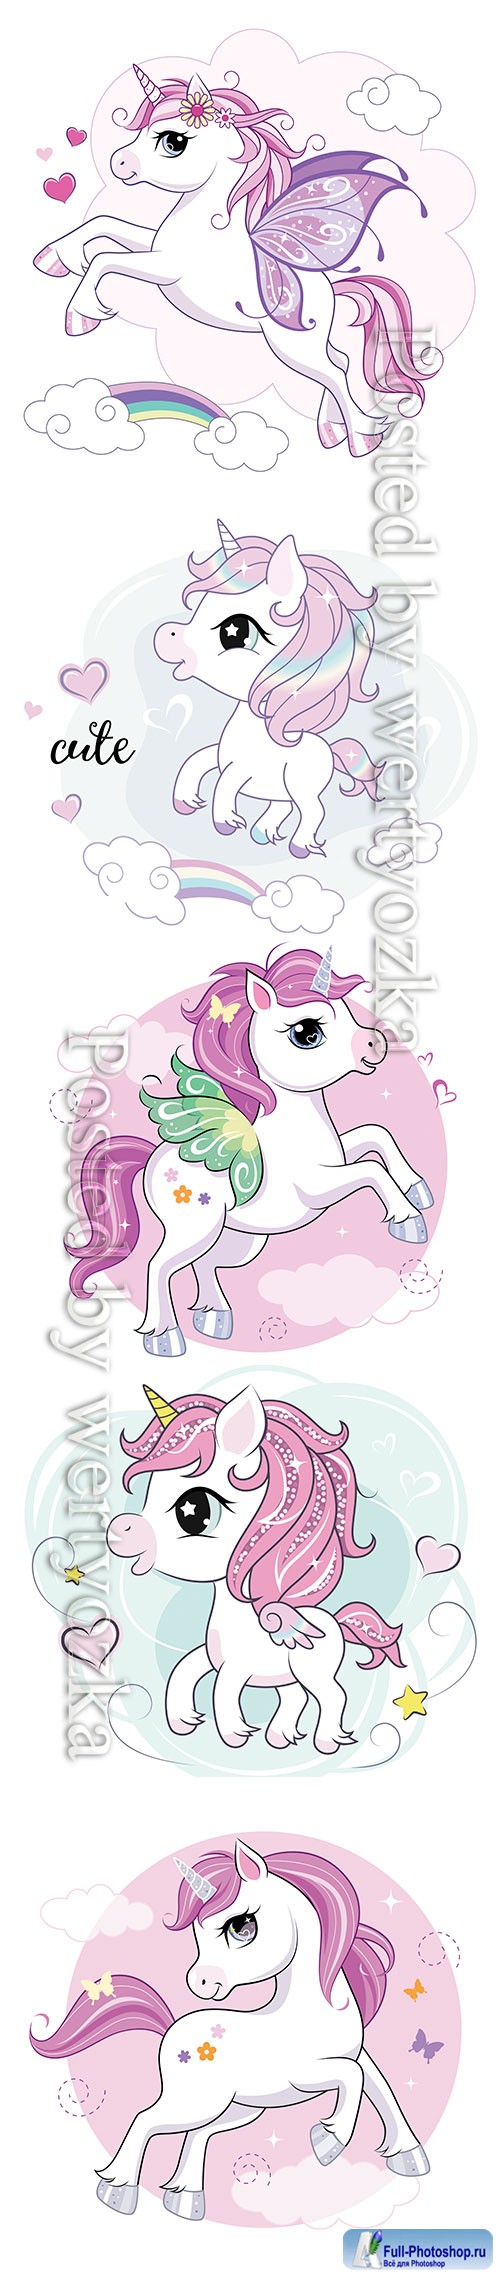 Cute little unicorn character on mint colored background